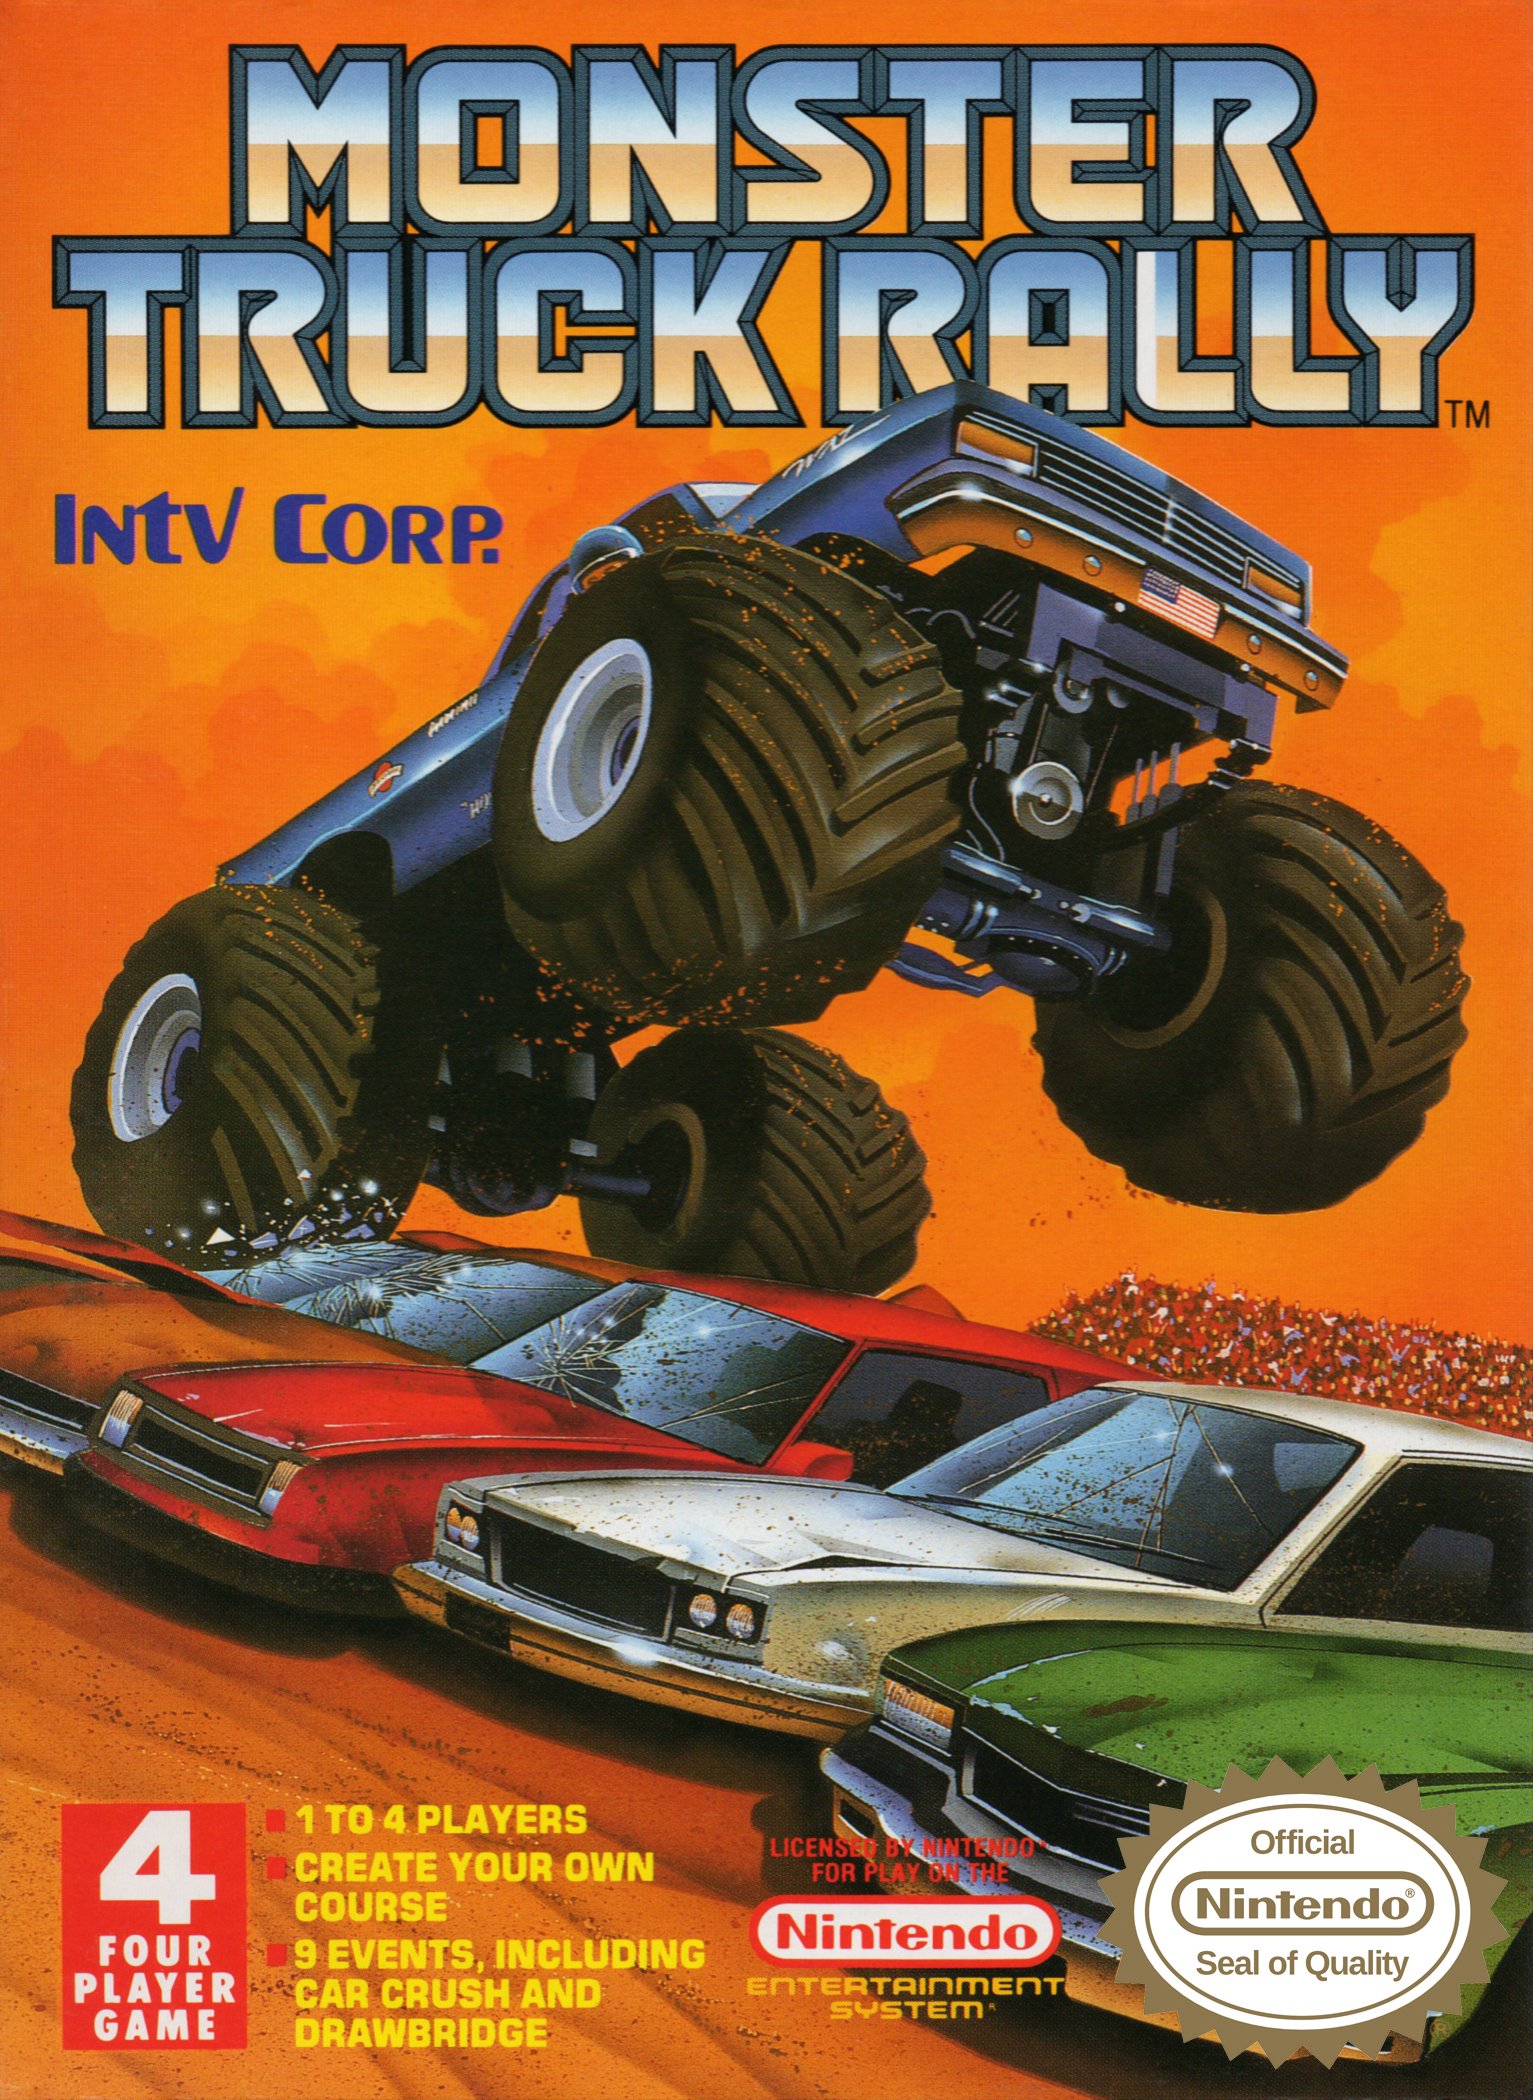 Image of Monster Truck Rally